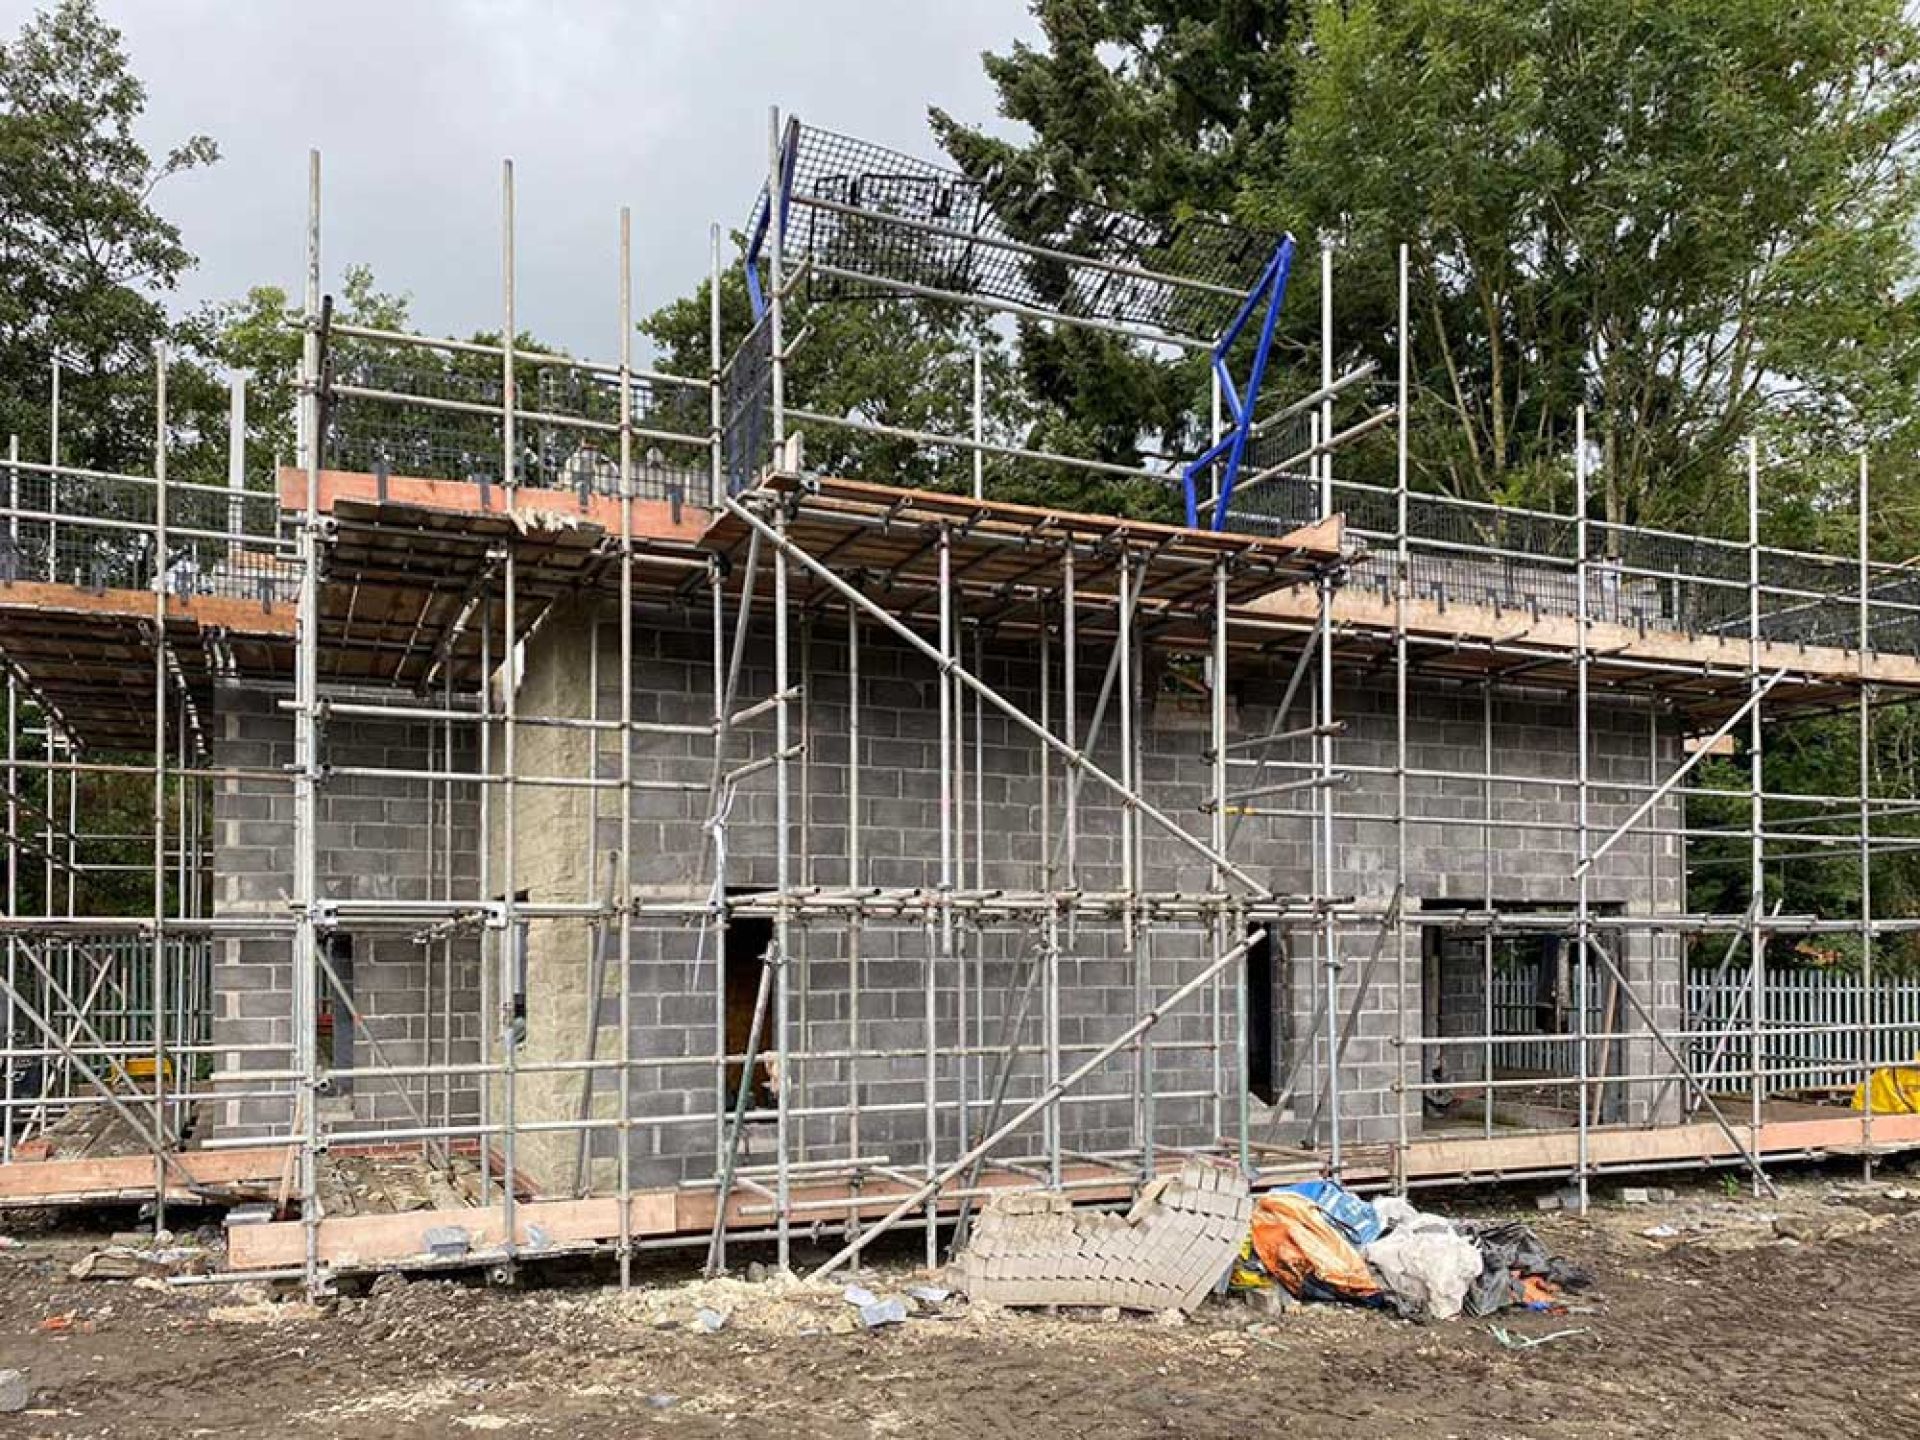 Construction progress of five bedroom manor house with breeze blocks and scaffolding.